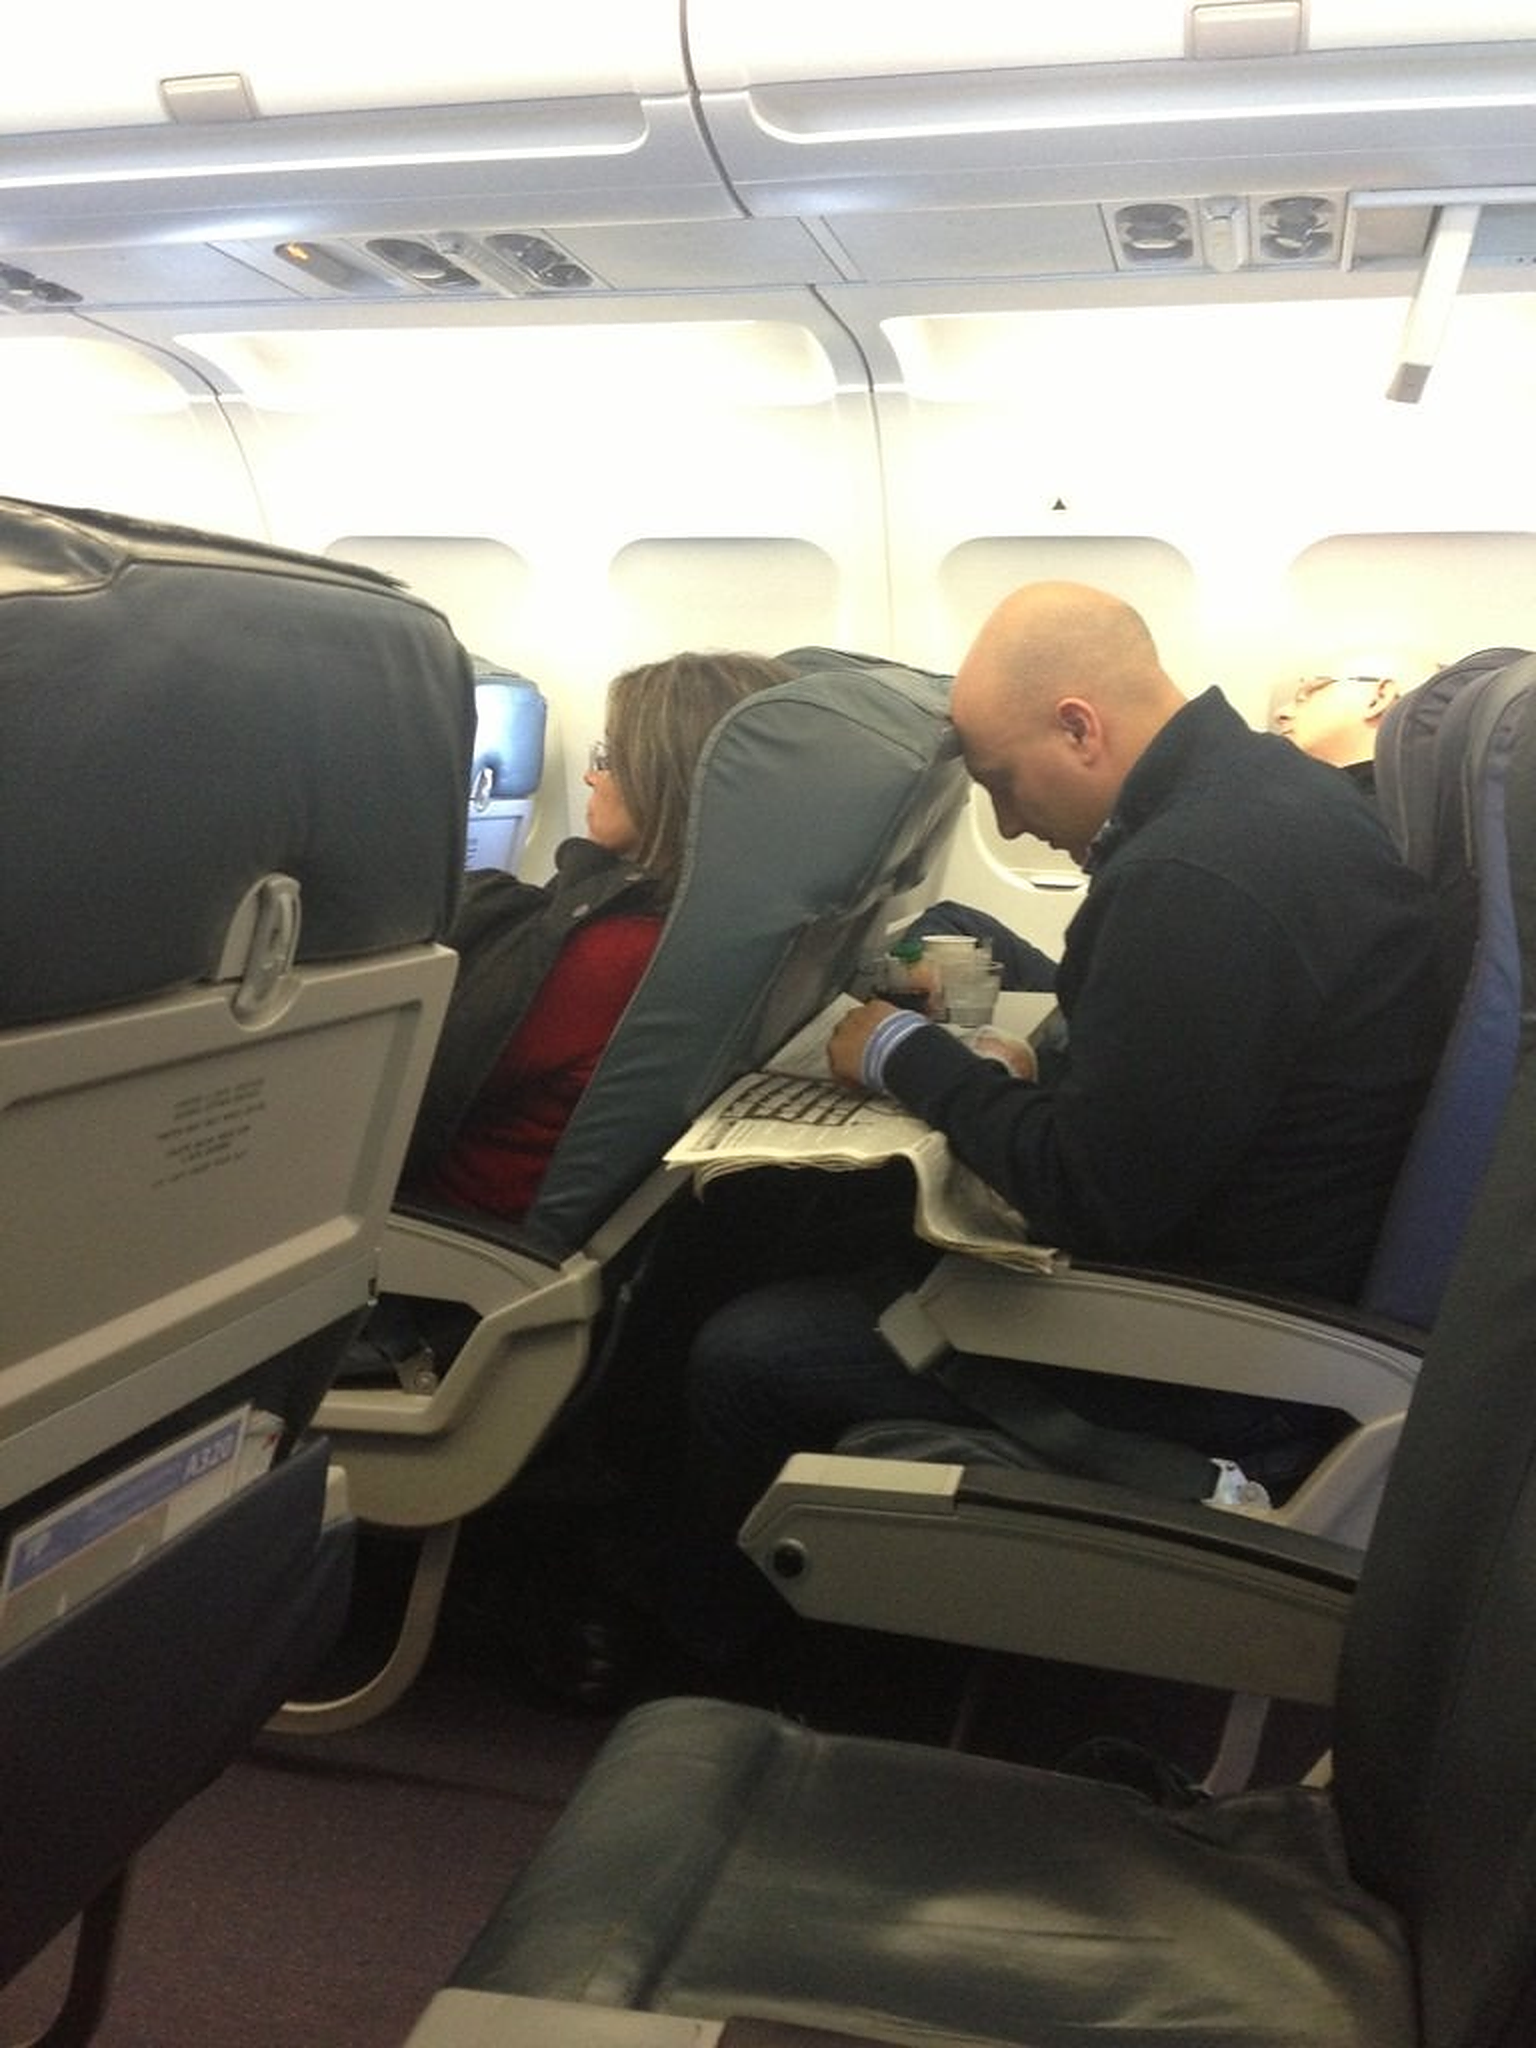 Woman reclining her seat on a plane.